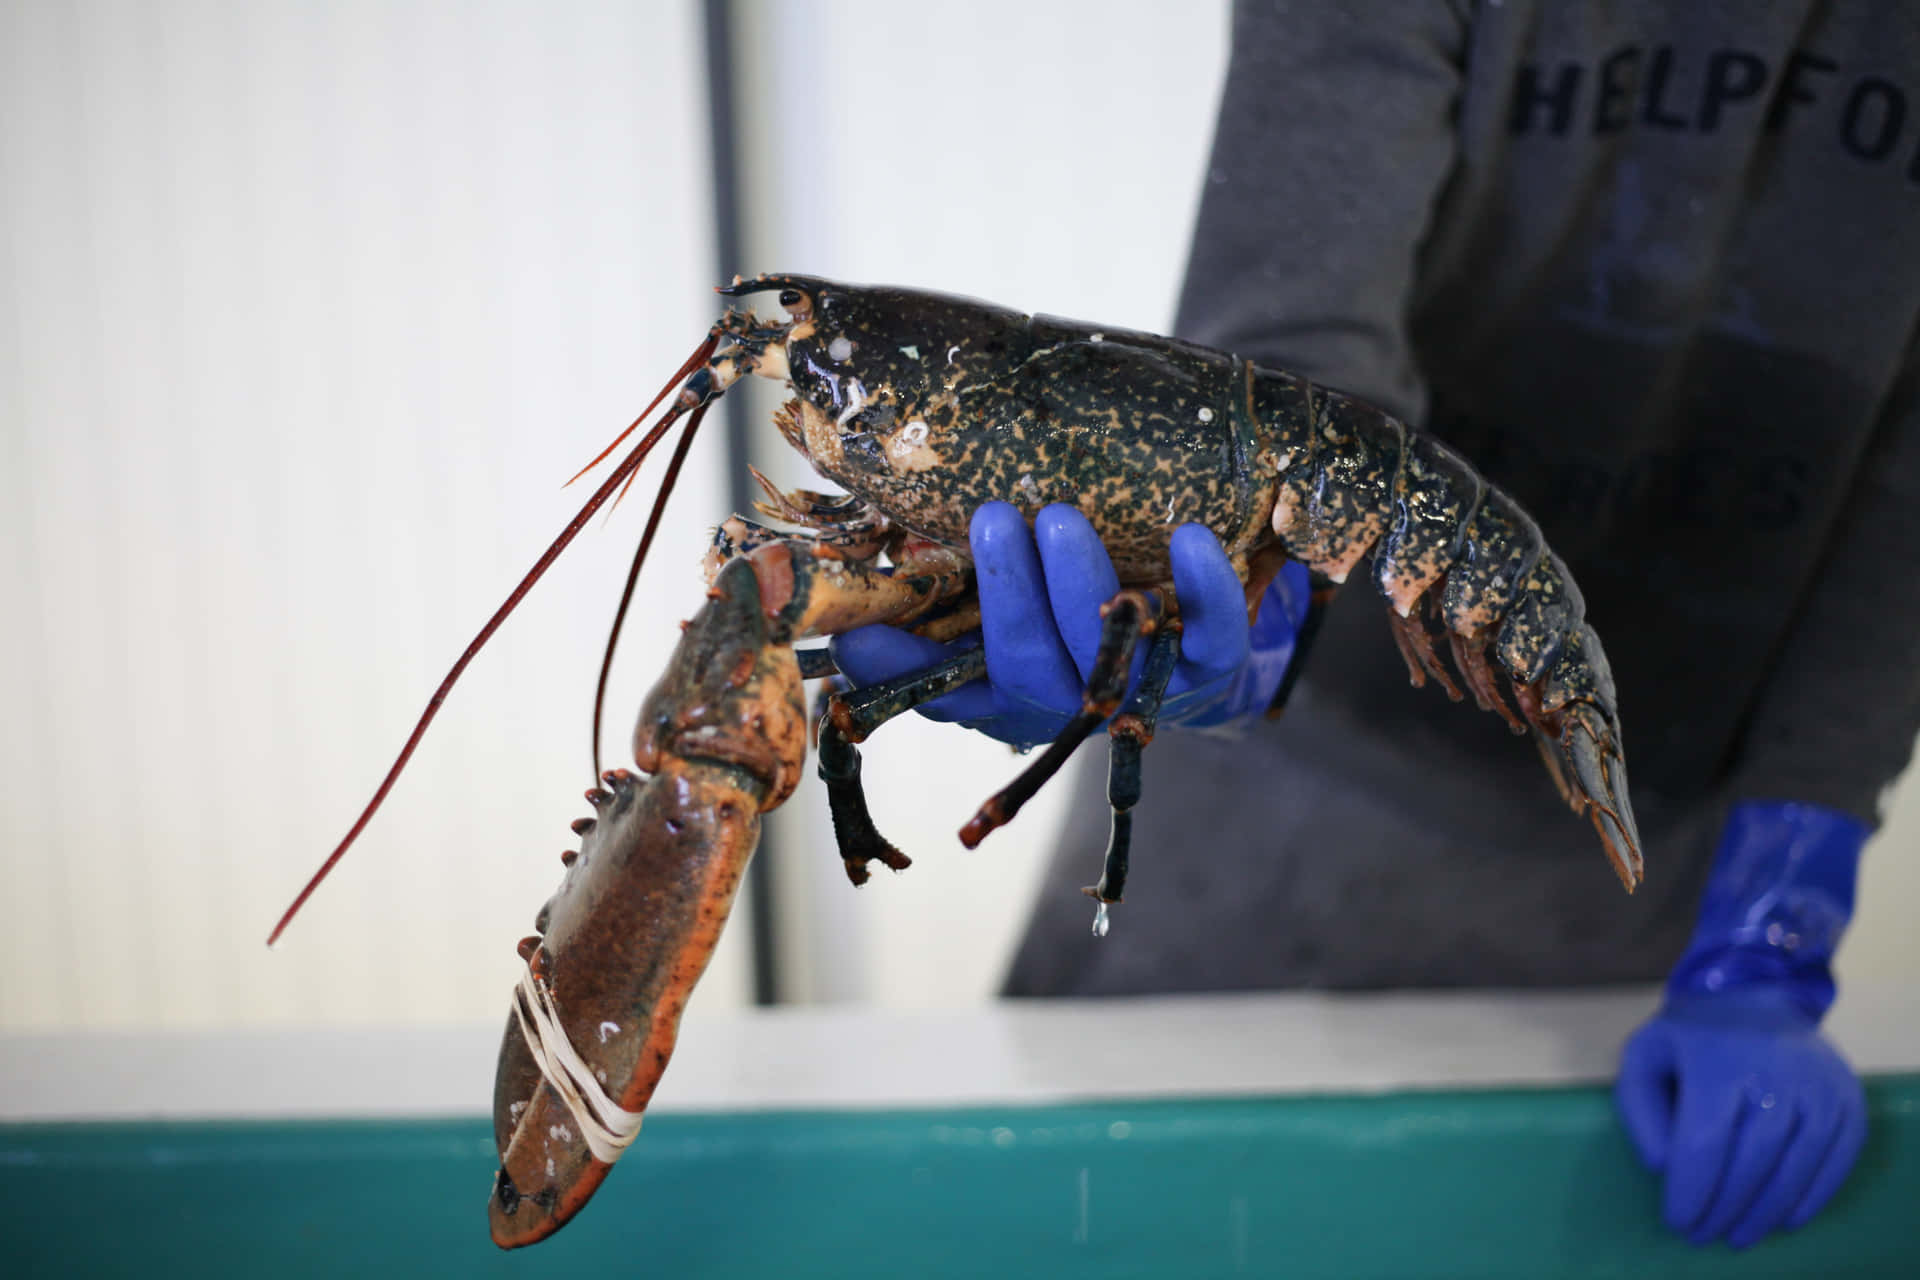 A succulent Red Rock Lobster, freshly caught and ready to be cooked